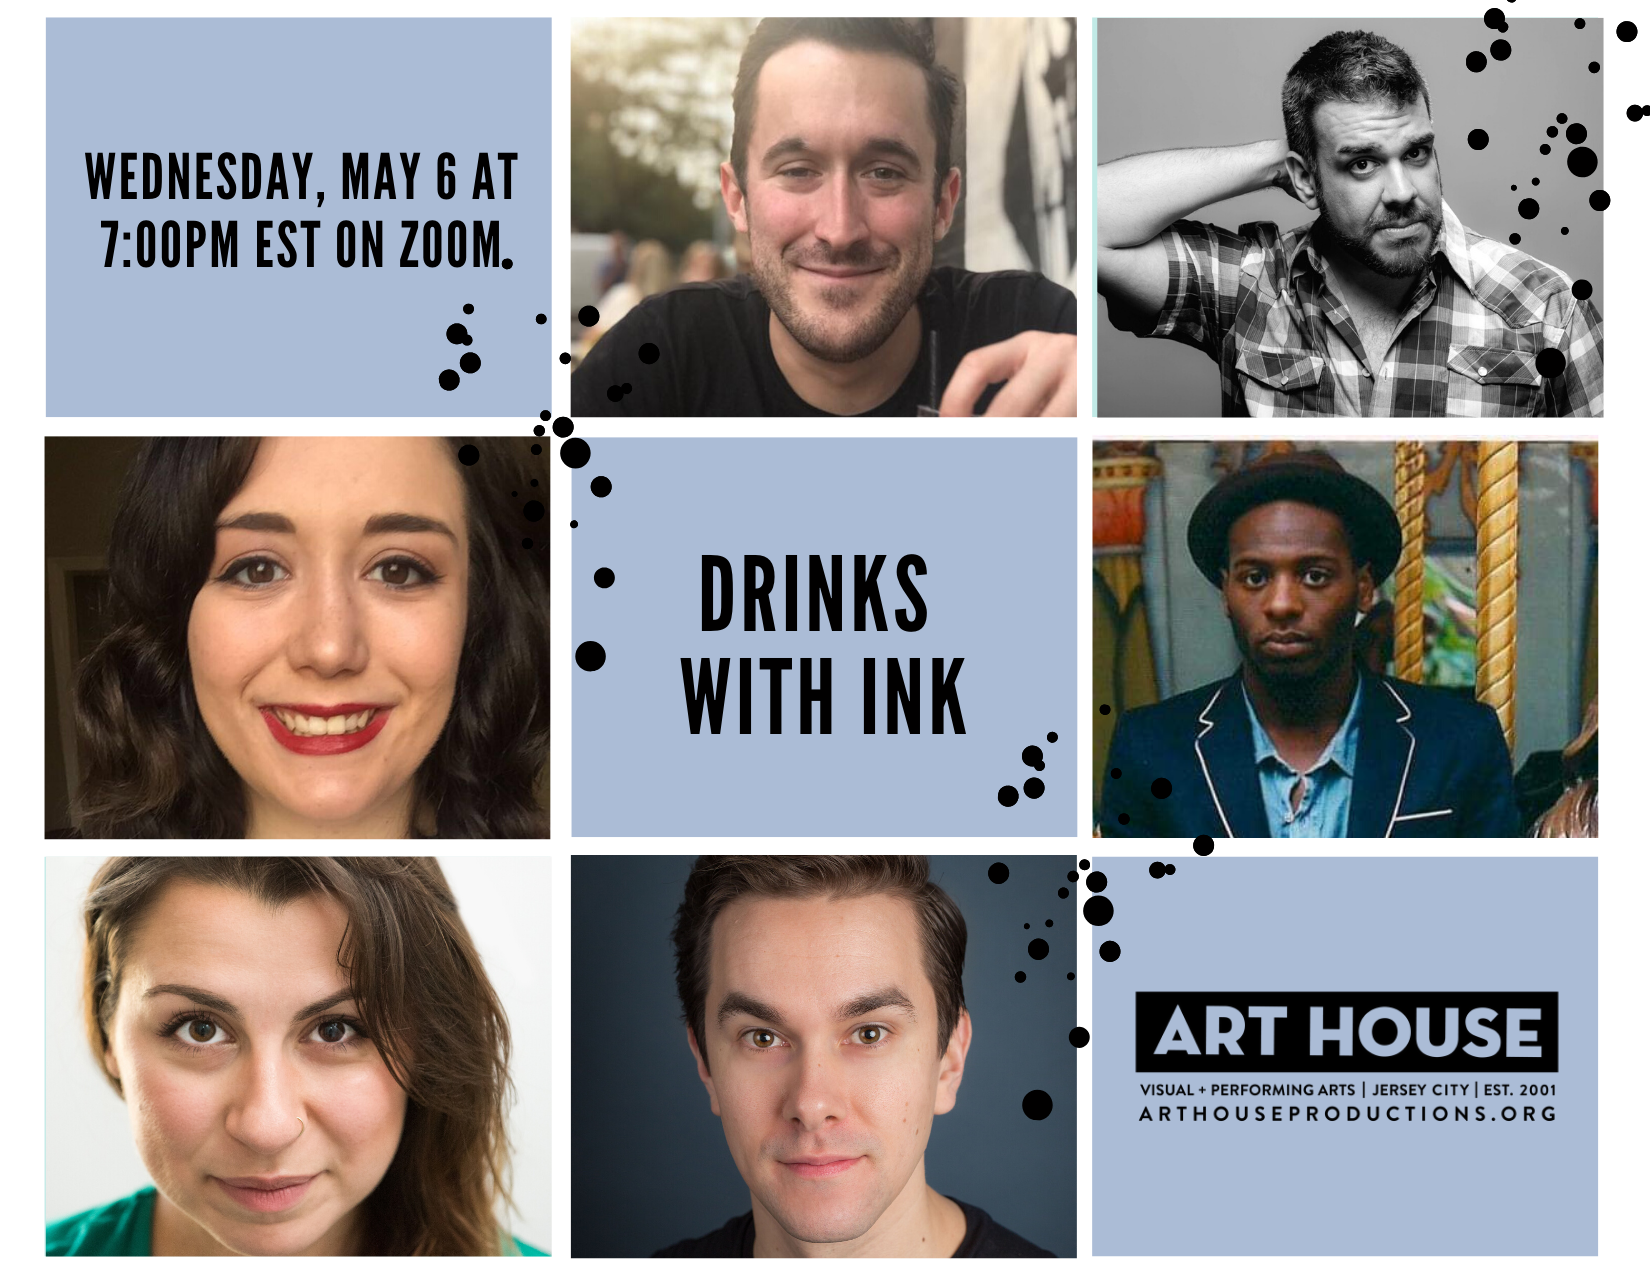 Drinks with Ink; Wednesday May 6 at 7PM est on Zoom